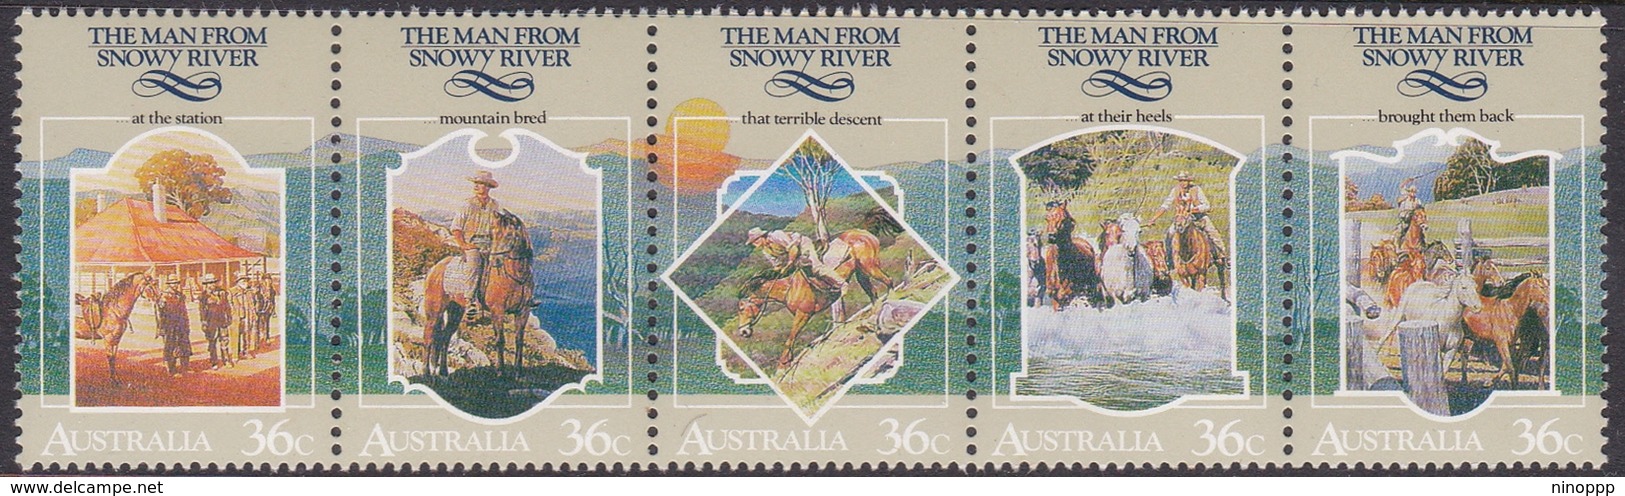 Australia ASC 1075-1079 1987 The Man From Snowy River, Mint Never Hinged - Mint Stamps